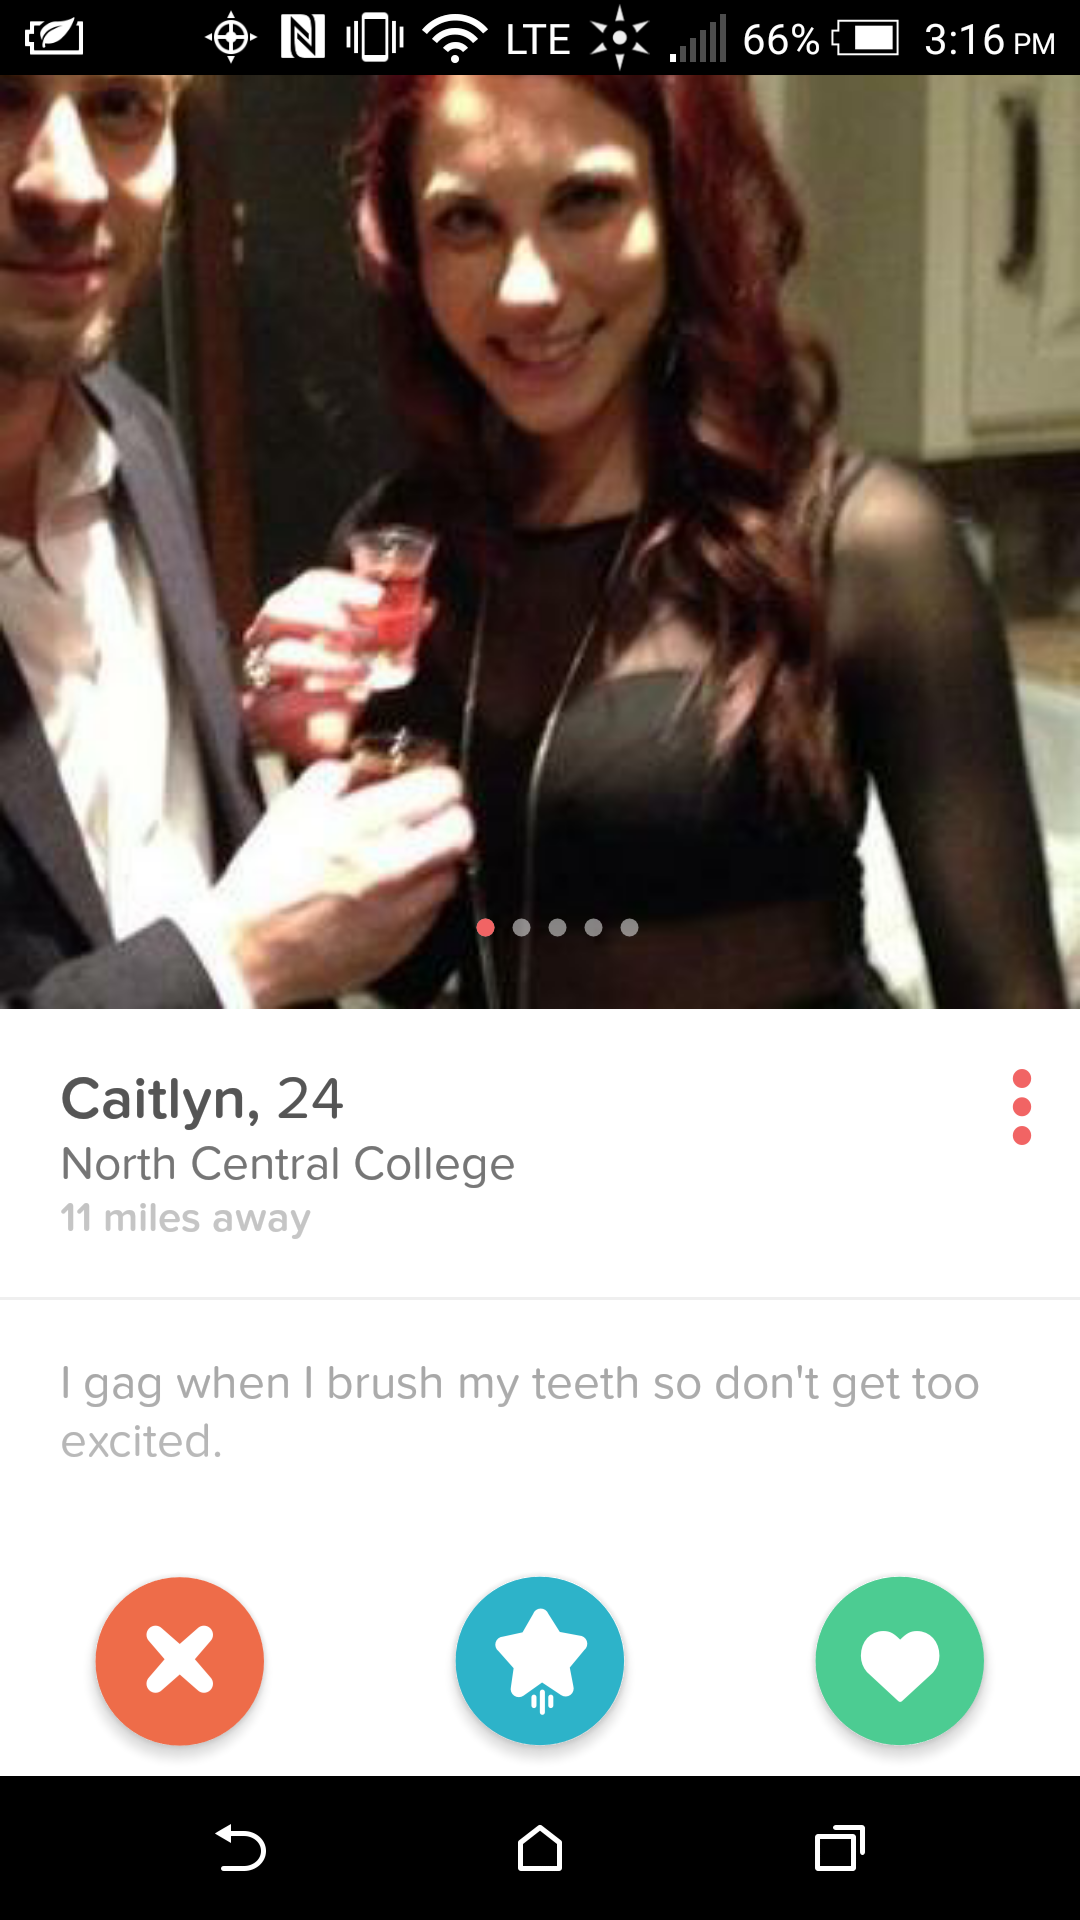 tinder is like a box of chocolates - No Lte 66% Caitlyn, 24 North Central College 11 miles away I gag when I brush my teeth so don't get too excited